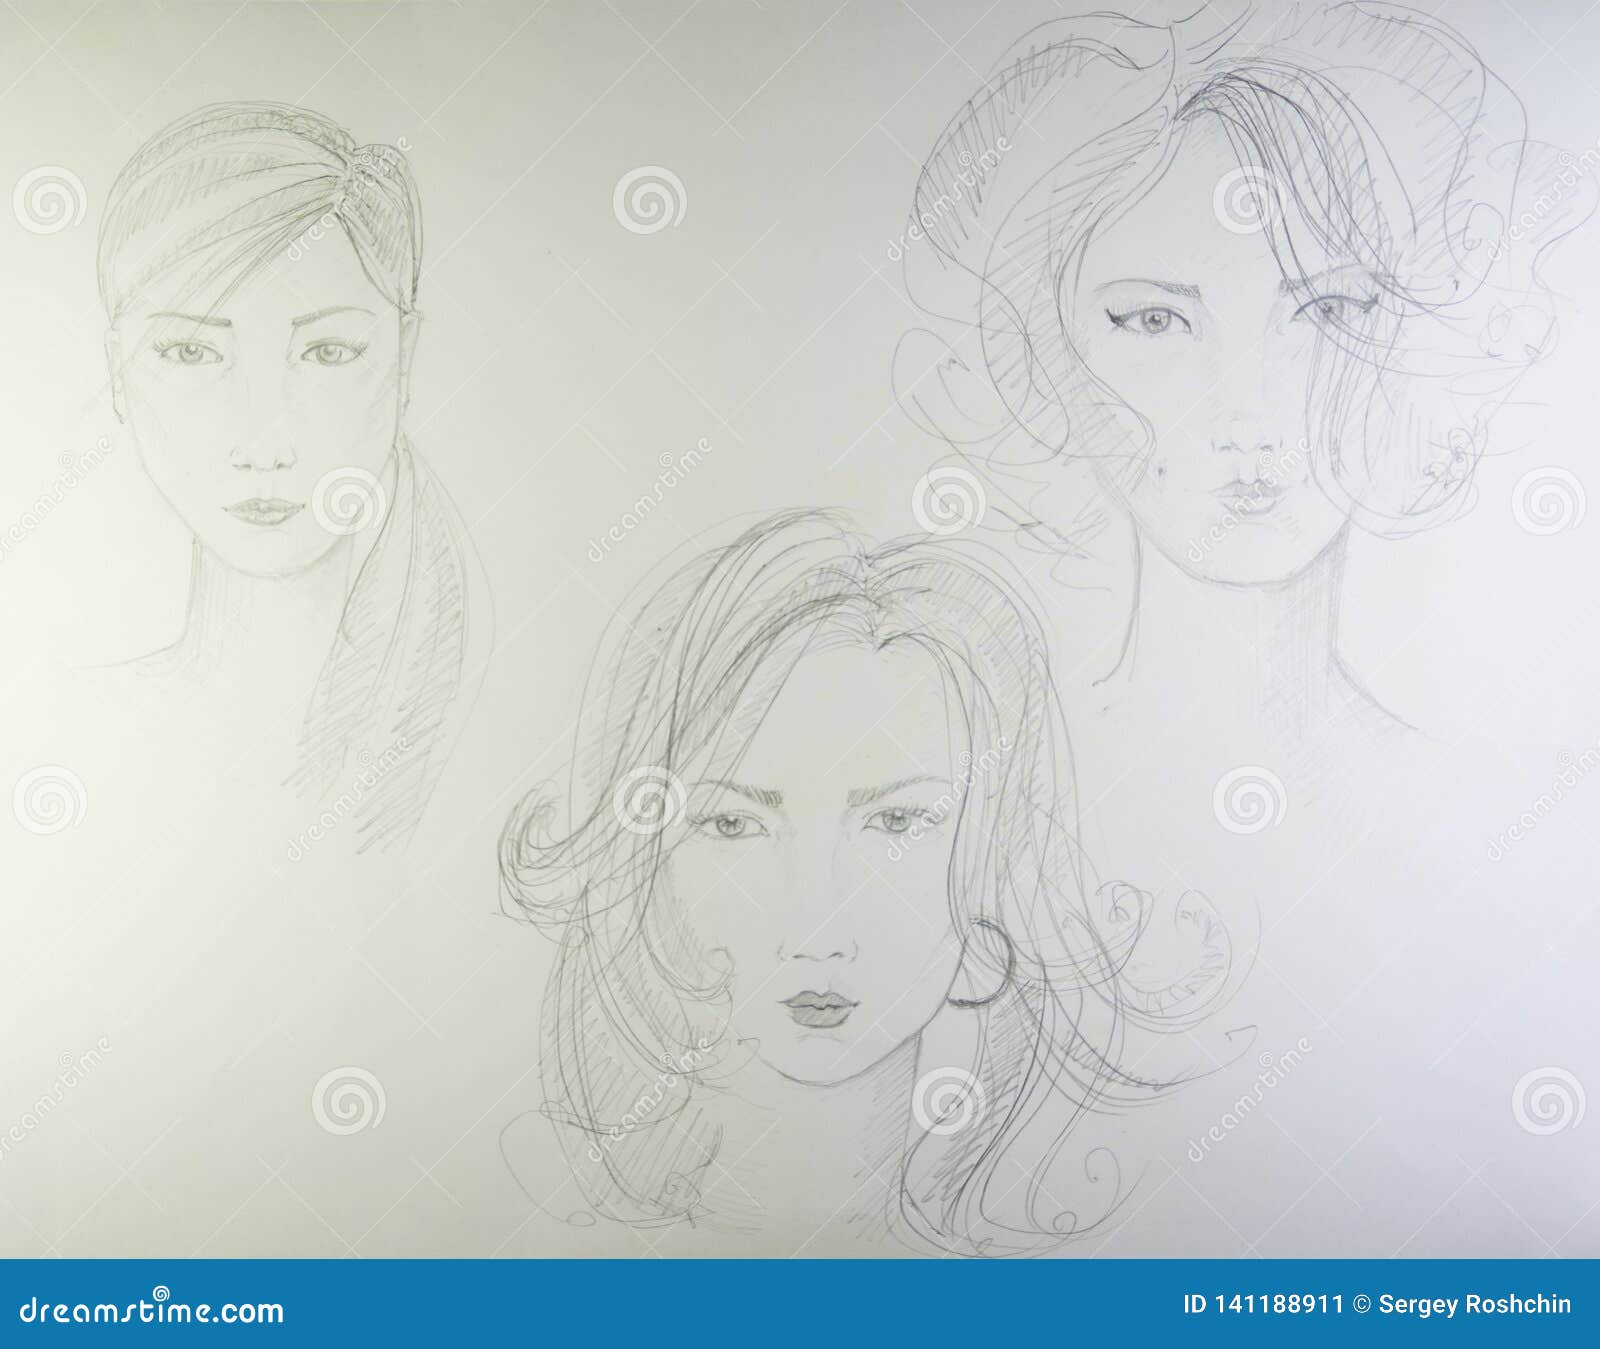 Female Hairstyles The Drawing On Paper A Pencil It Is Black